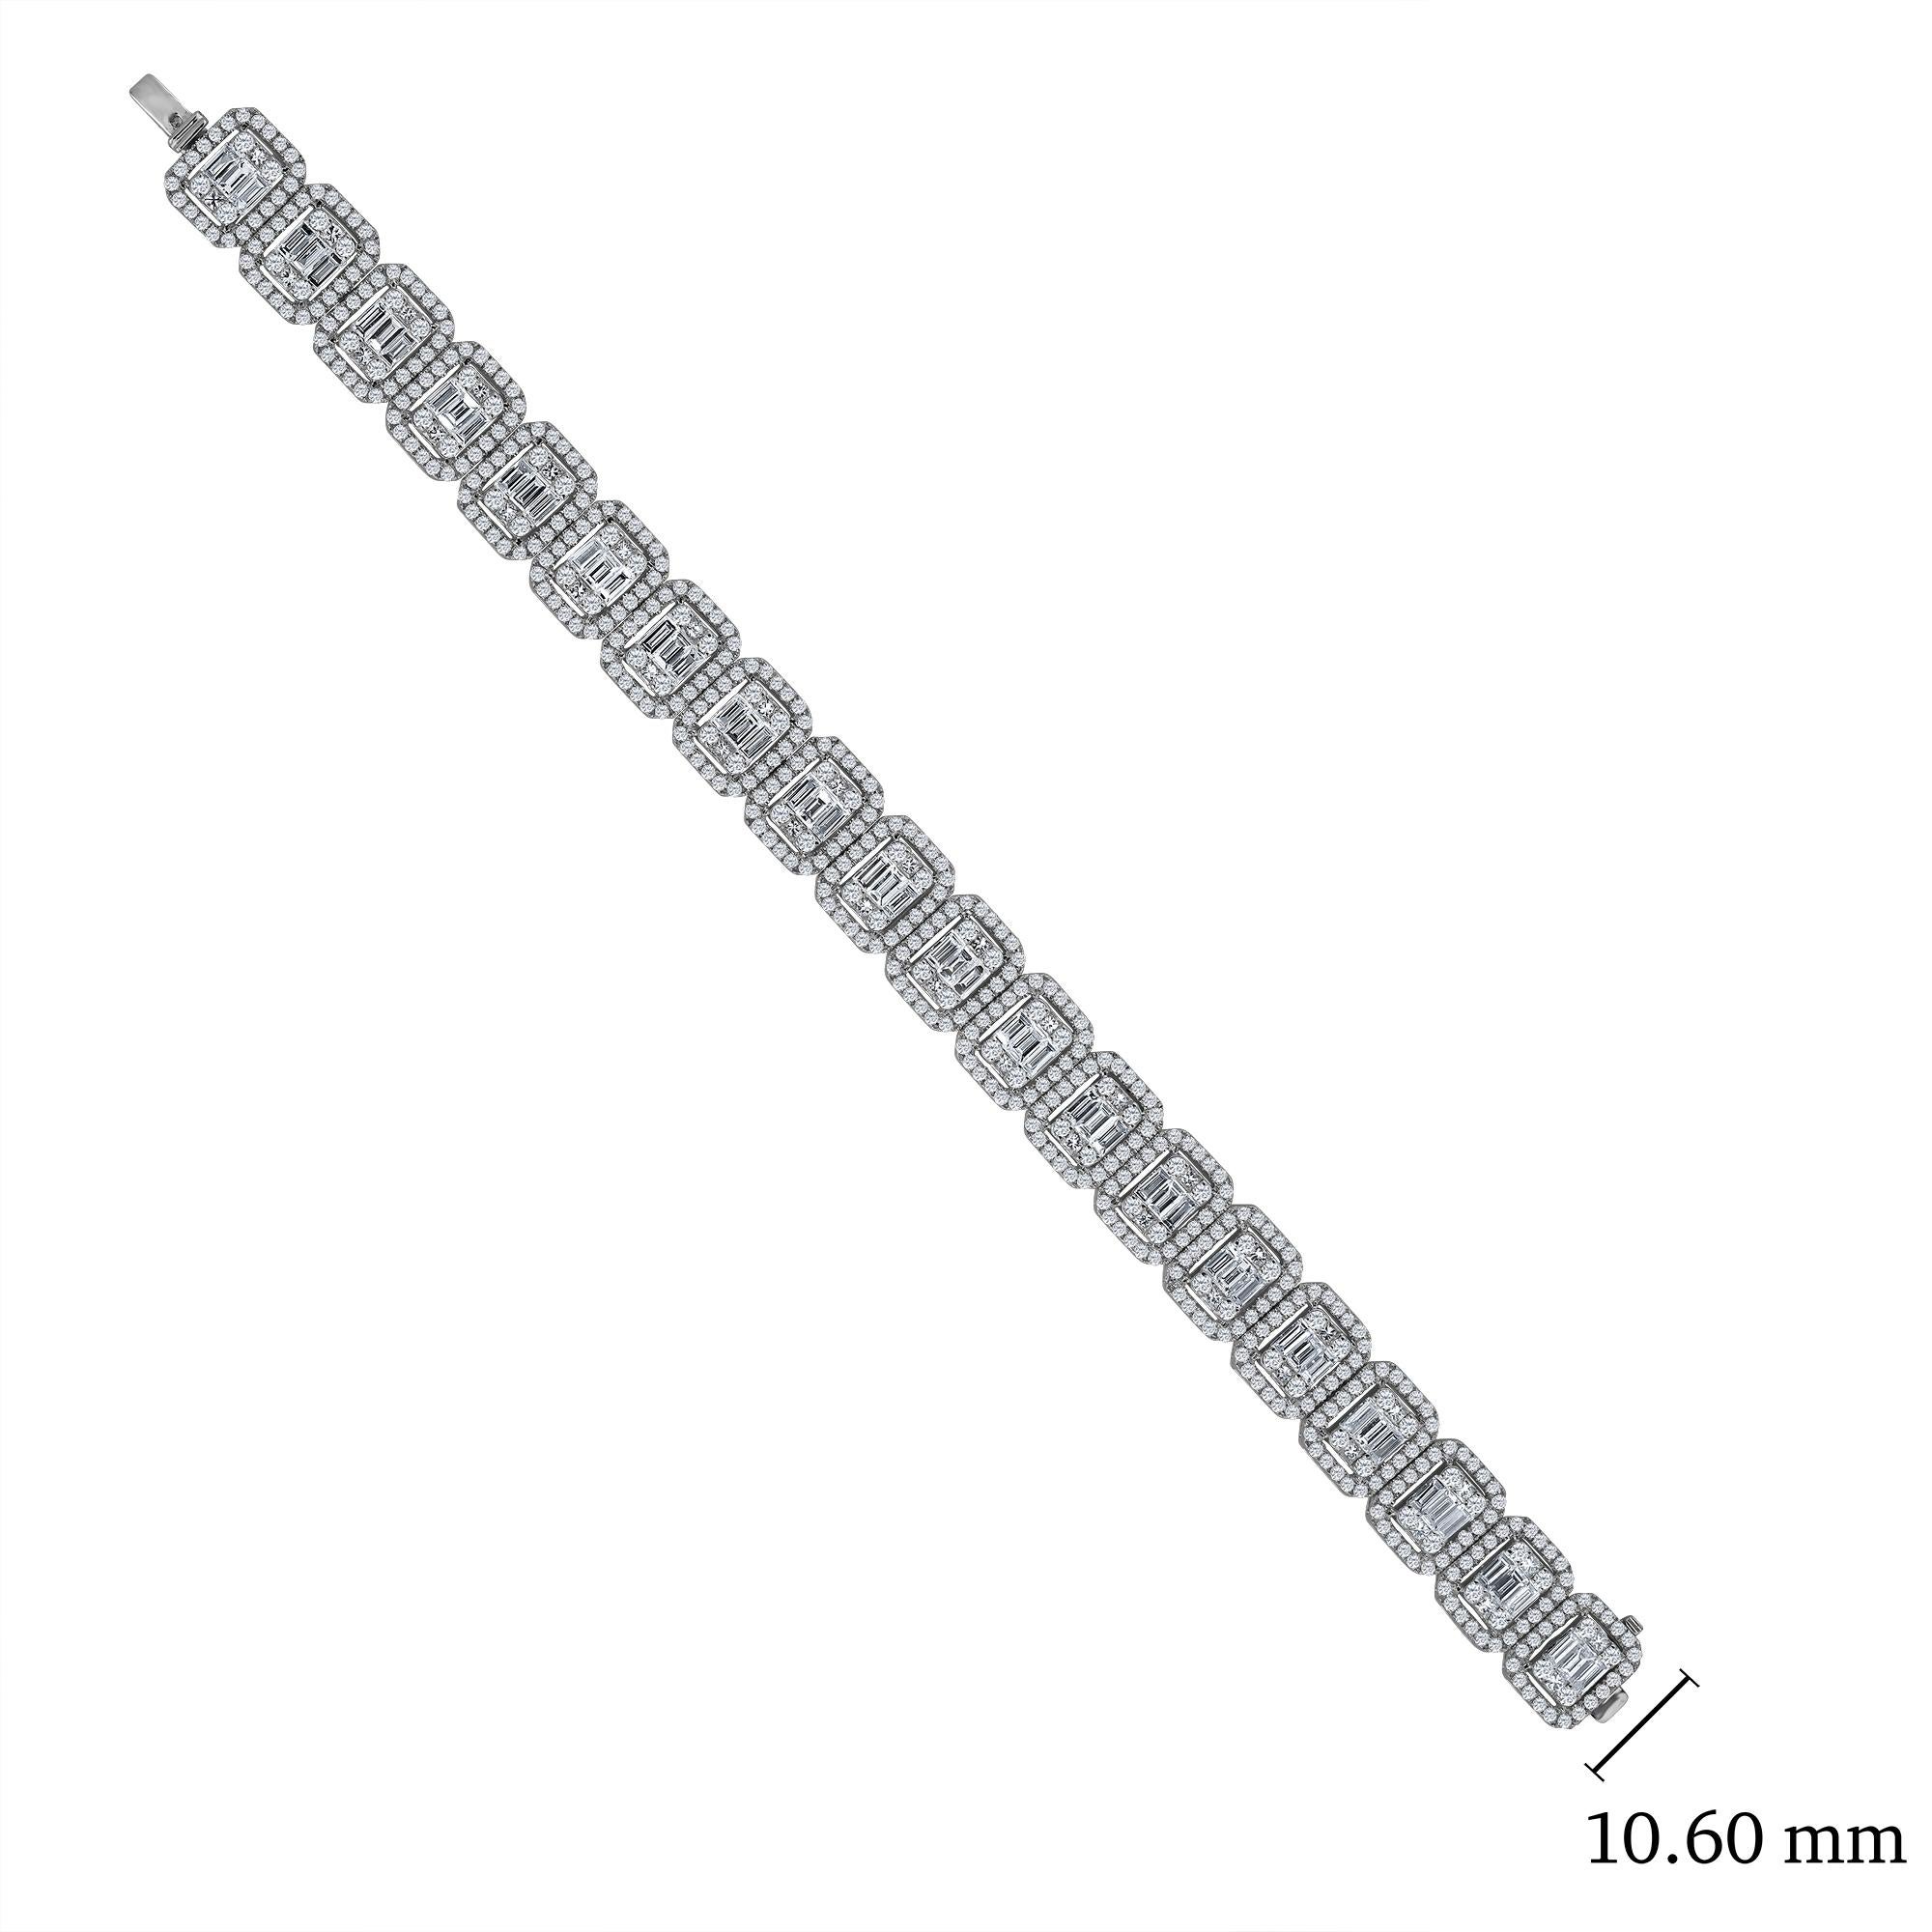 This striking diamond bracelet gives the impression of a much larger piece! 
Color: E-F
Clarity: Vs2 
Metal: !8kw
Length: 7 inches can be shorter or long by request 
For your piece of mind we are a proud Top Selling dealer on 1stdibs with 5 Star